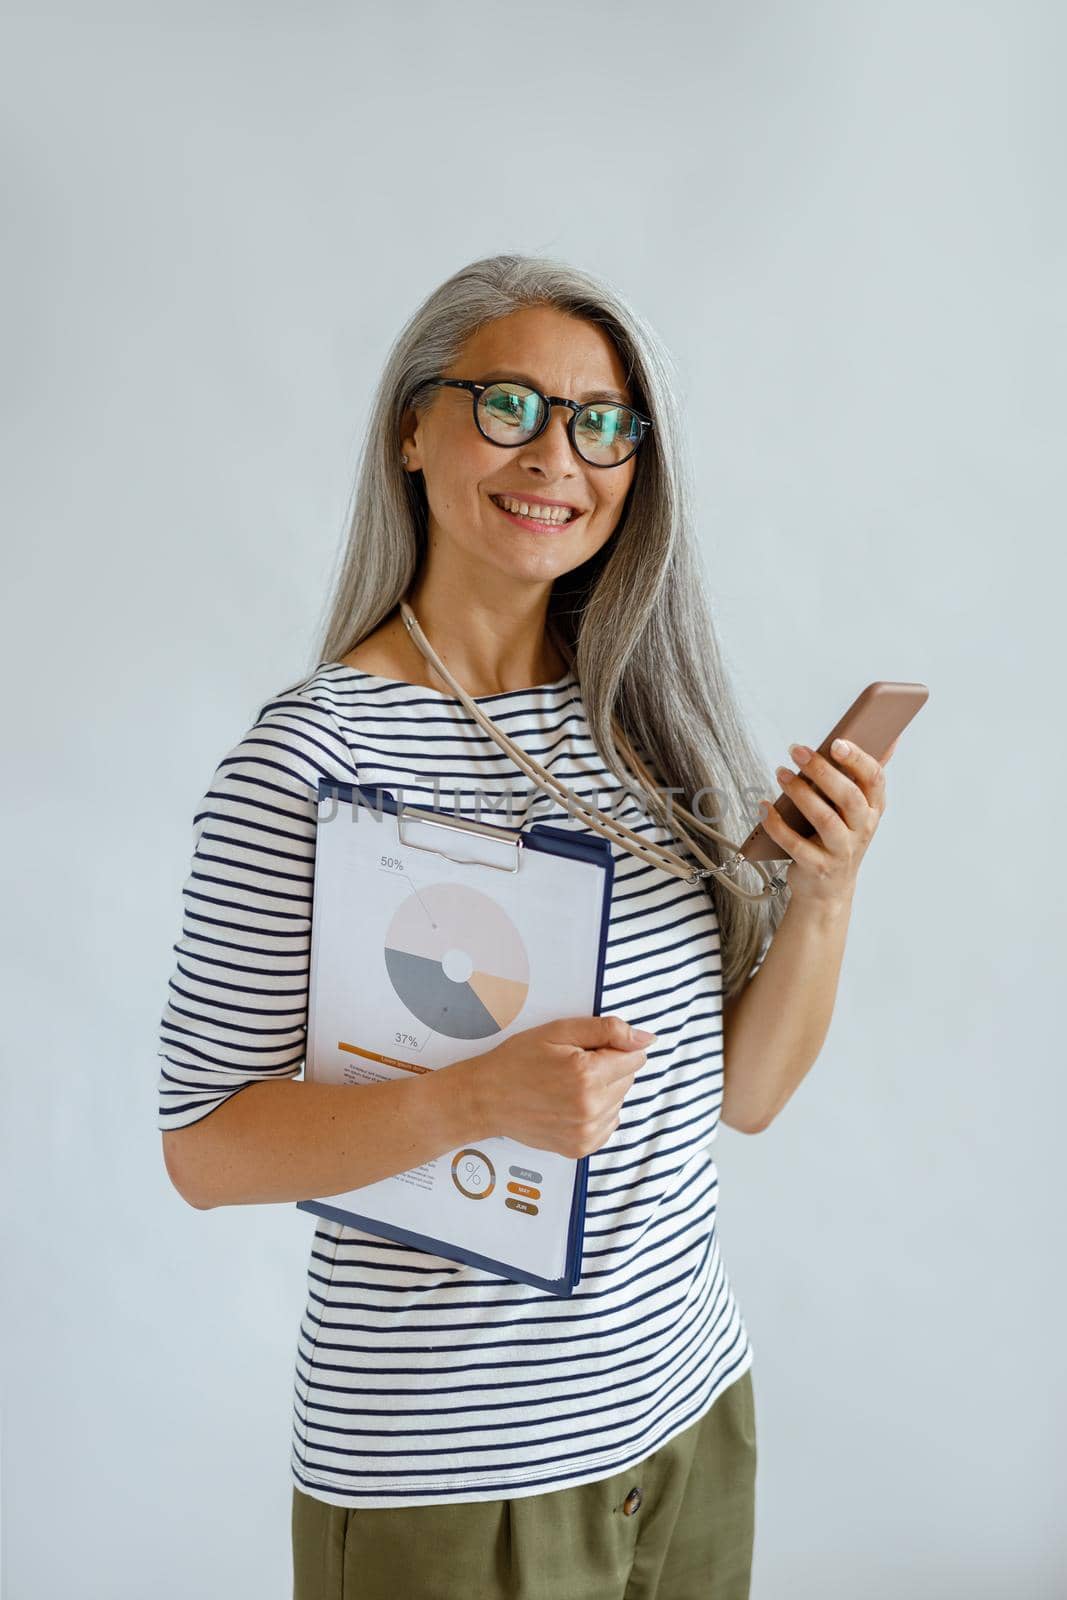 Smiling silver haired Asian lady with glasses holds colorful diagrams and smart phone standing on light grey background in studio